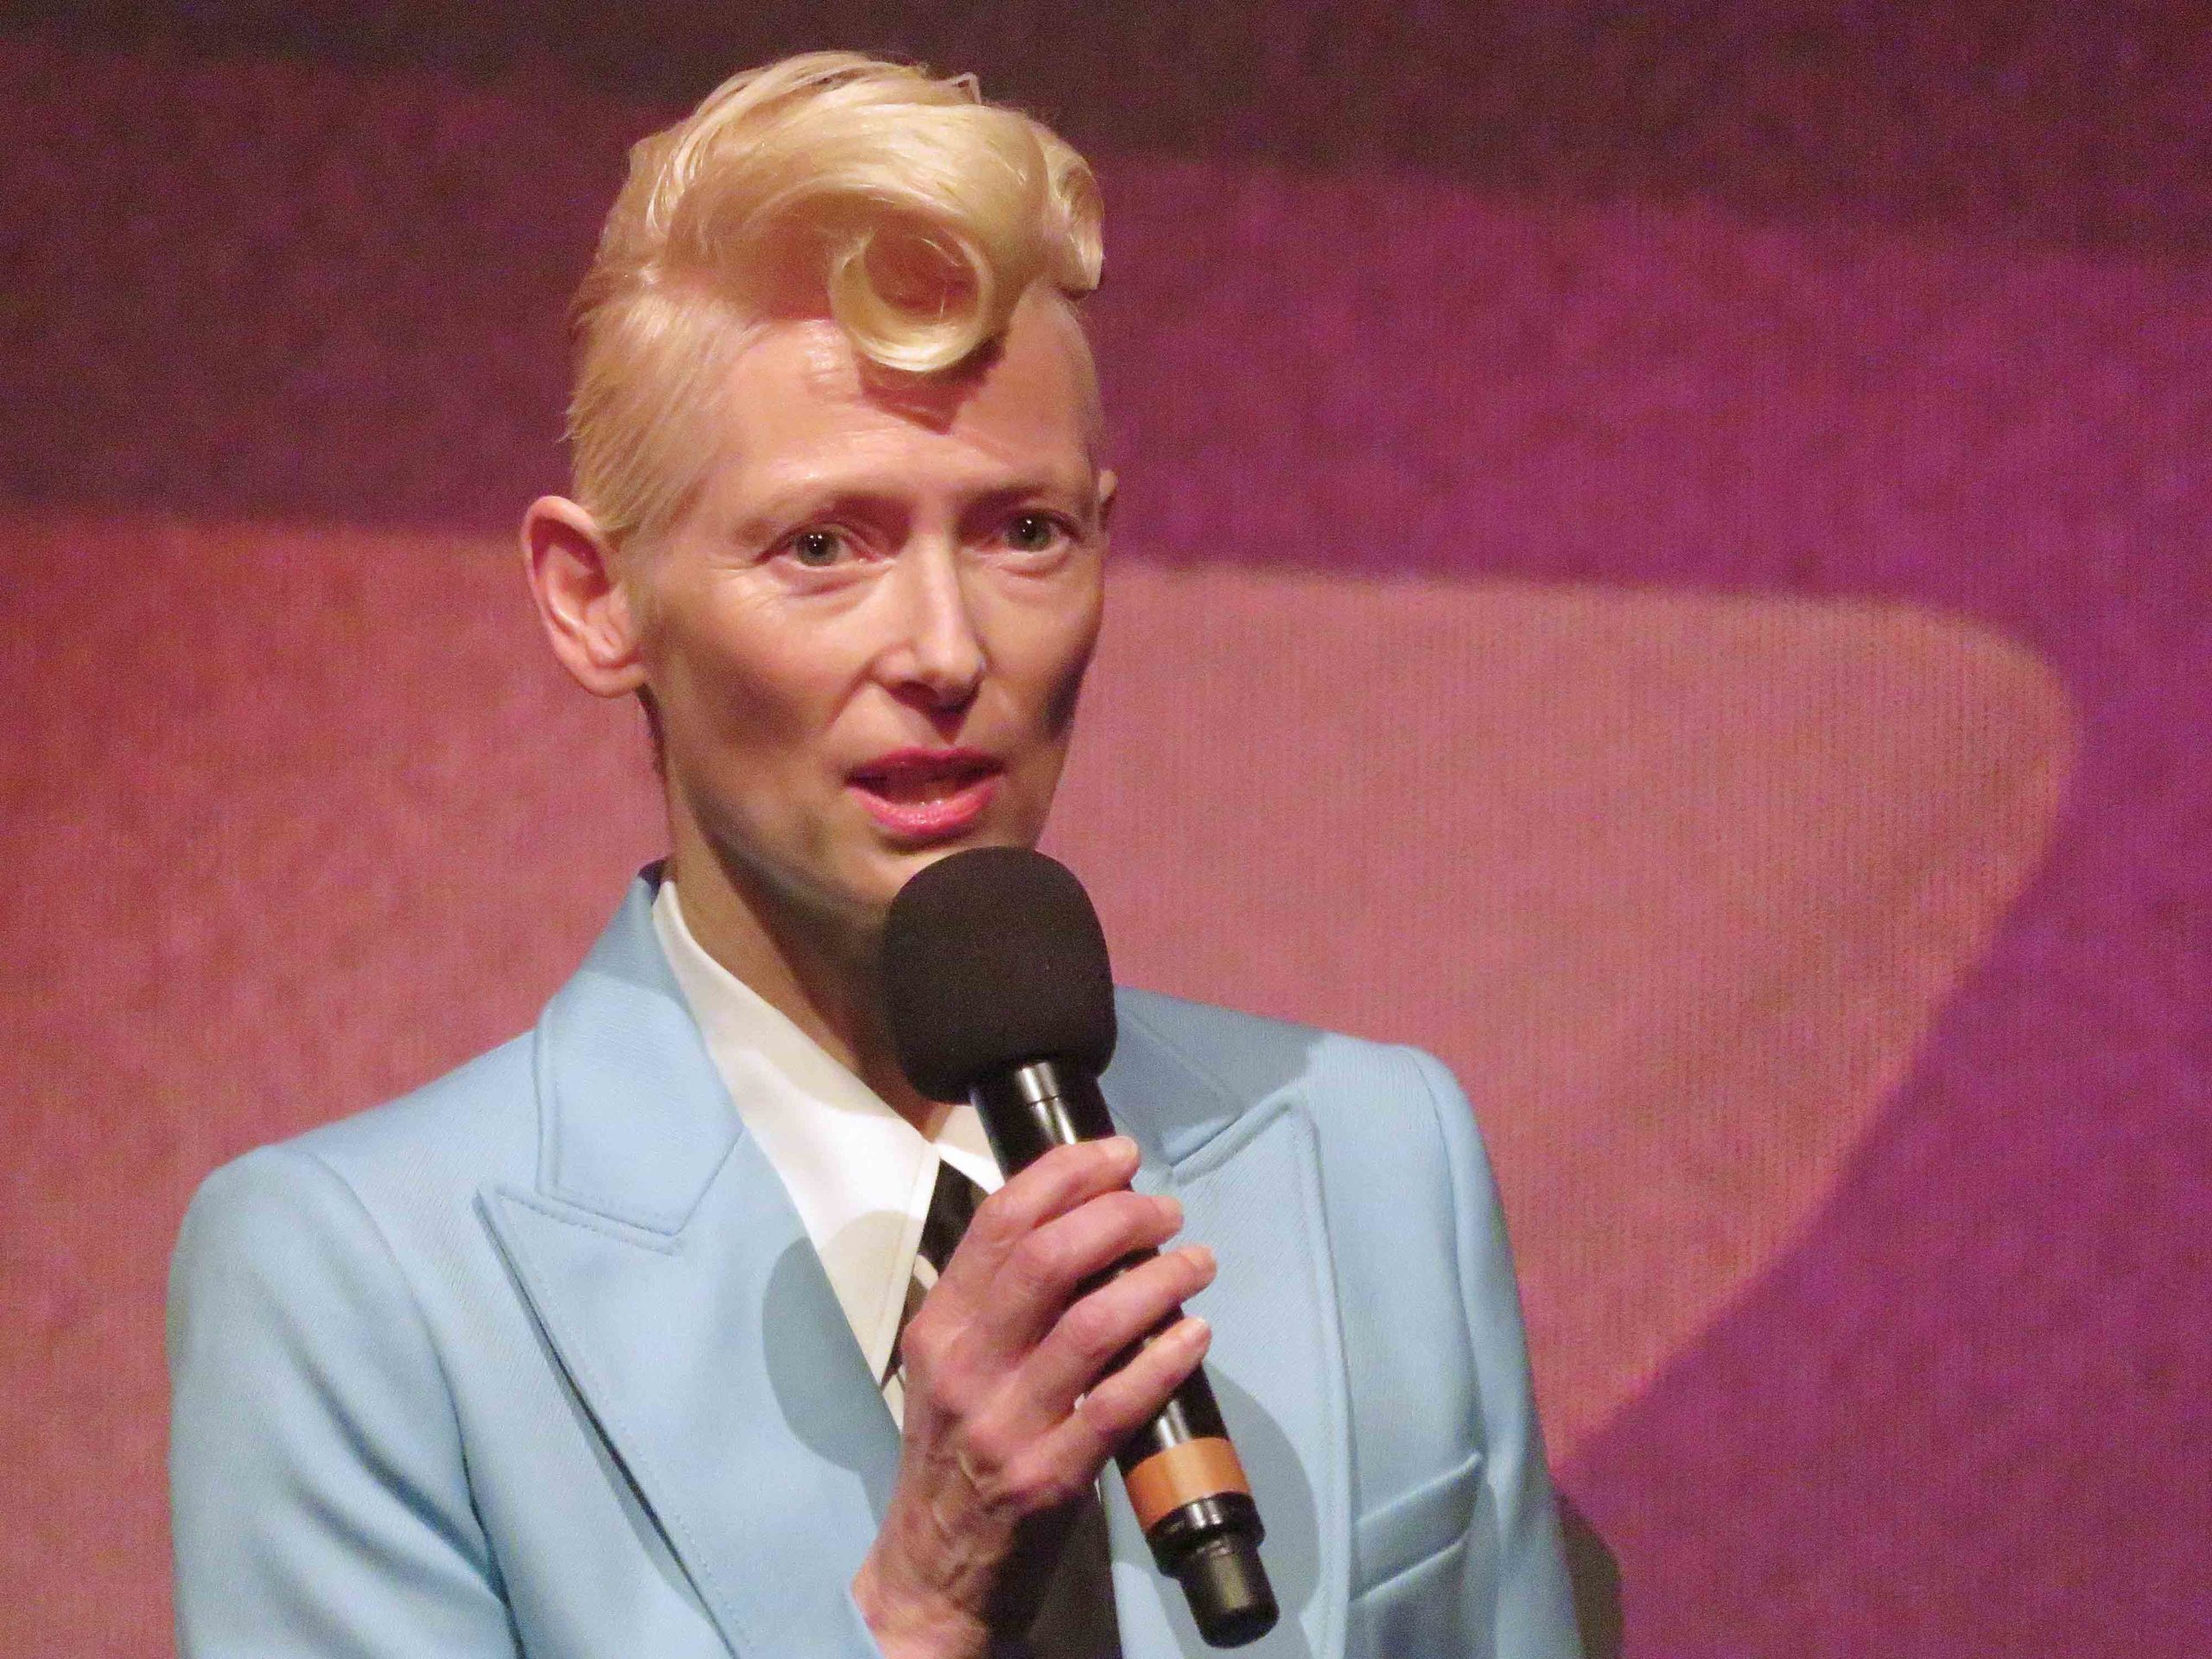 Tilda Swinton. A middle aged white woman. She has blond hair, shaved at the side and longer on top with a kiss curl fringe. She is holding a microphone and wearing a powder blue suit jacket, white shirt and black tie.